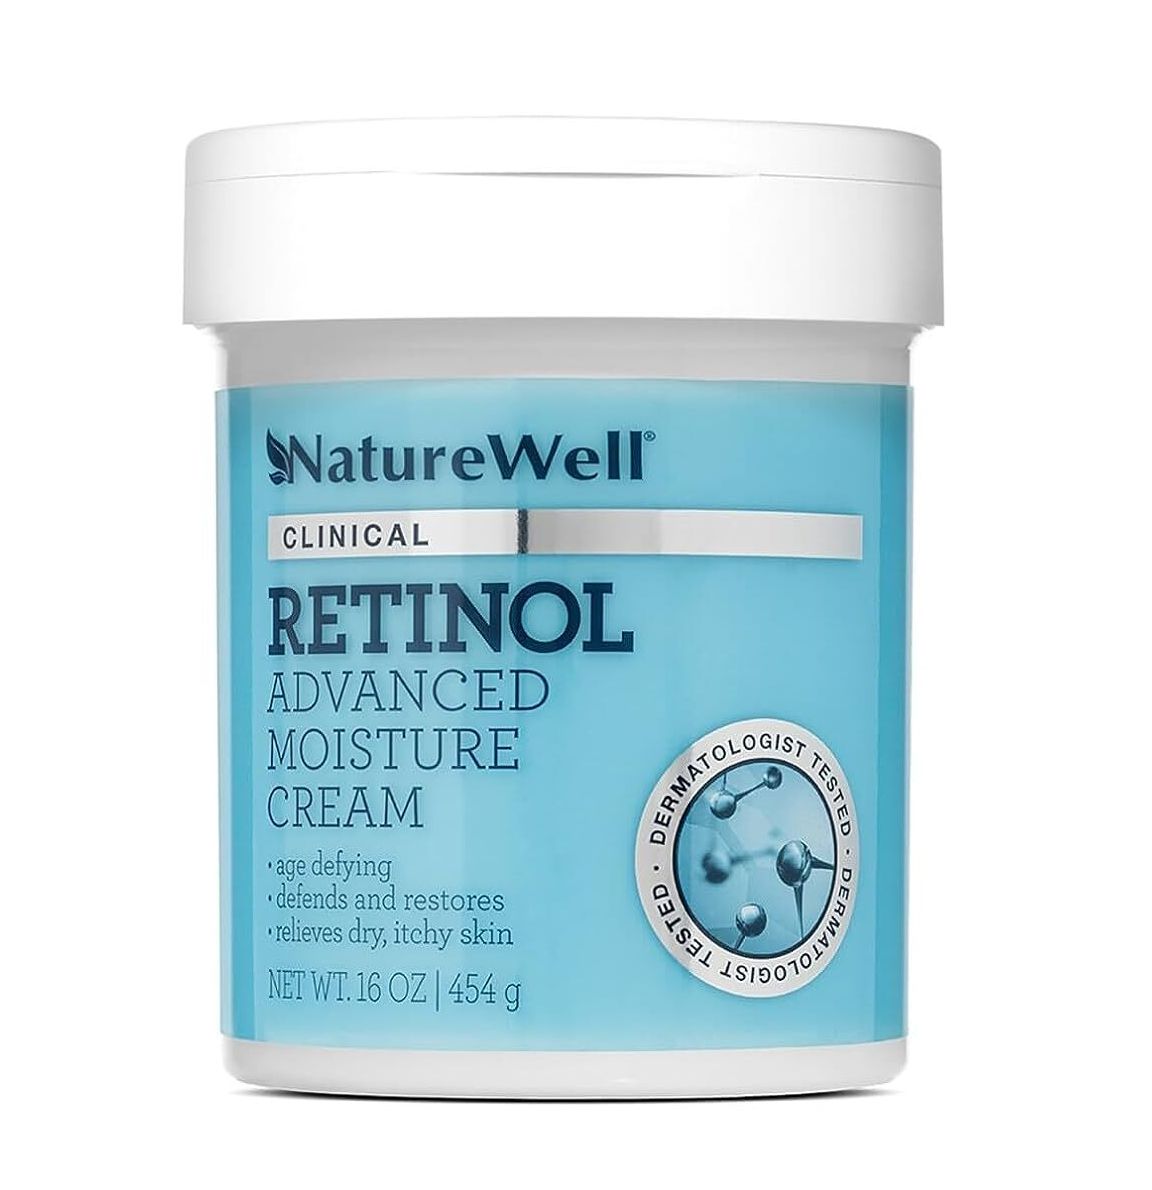 A reviewer-loved anti-aging retinol cream for body and hands (30% off)